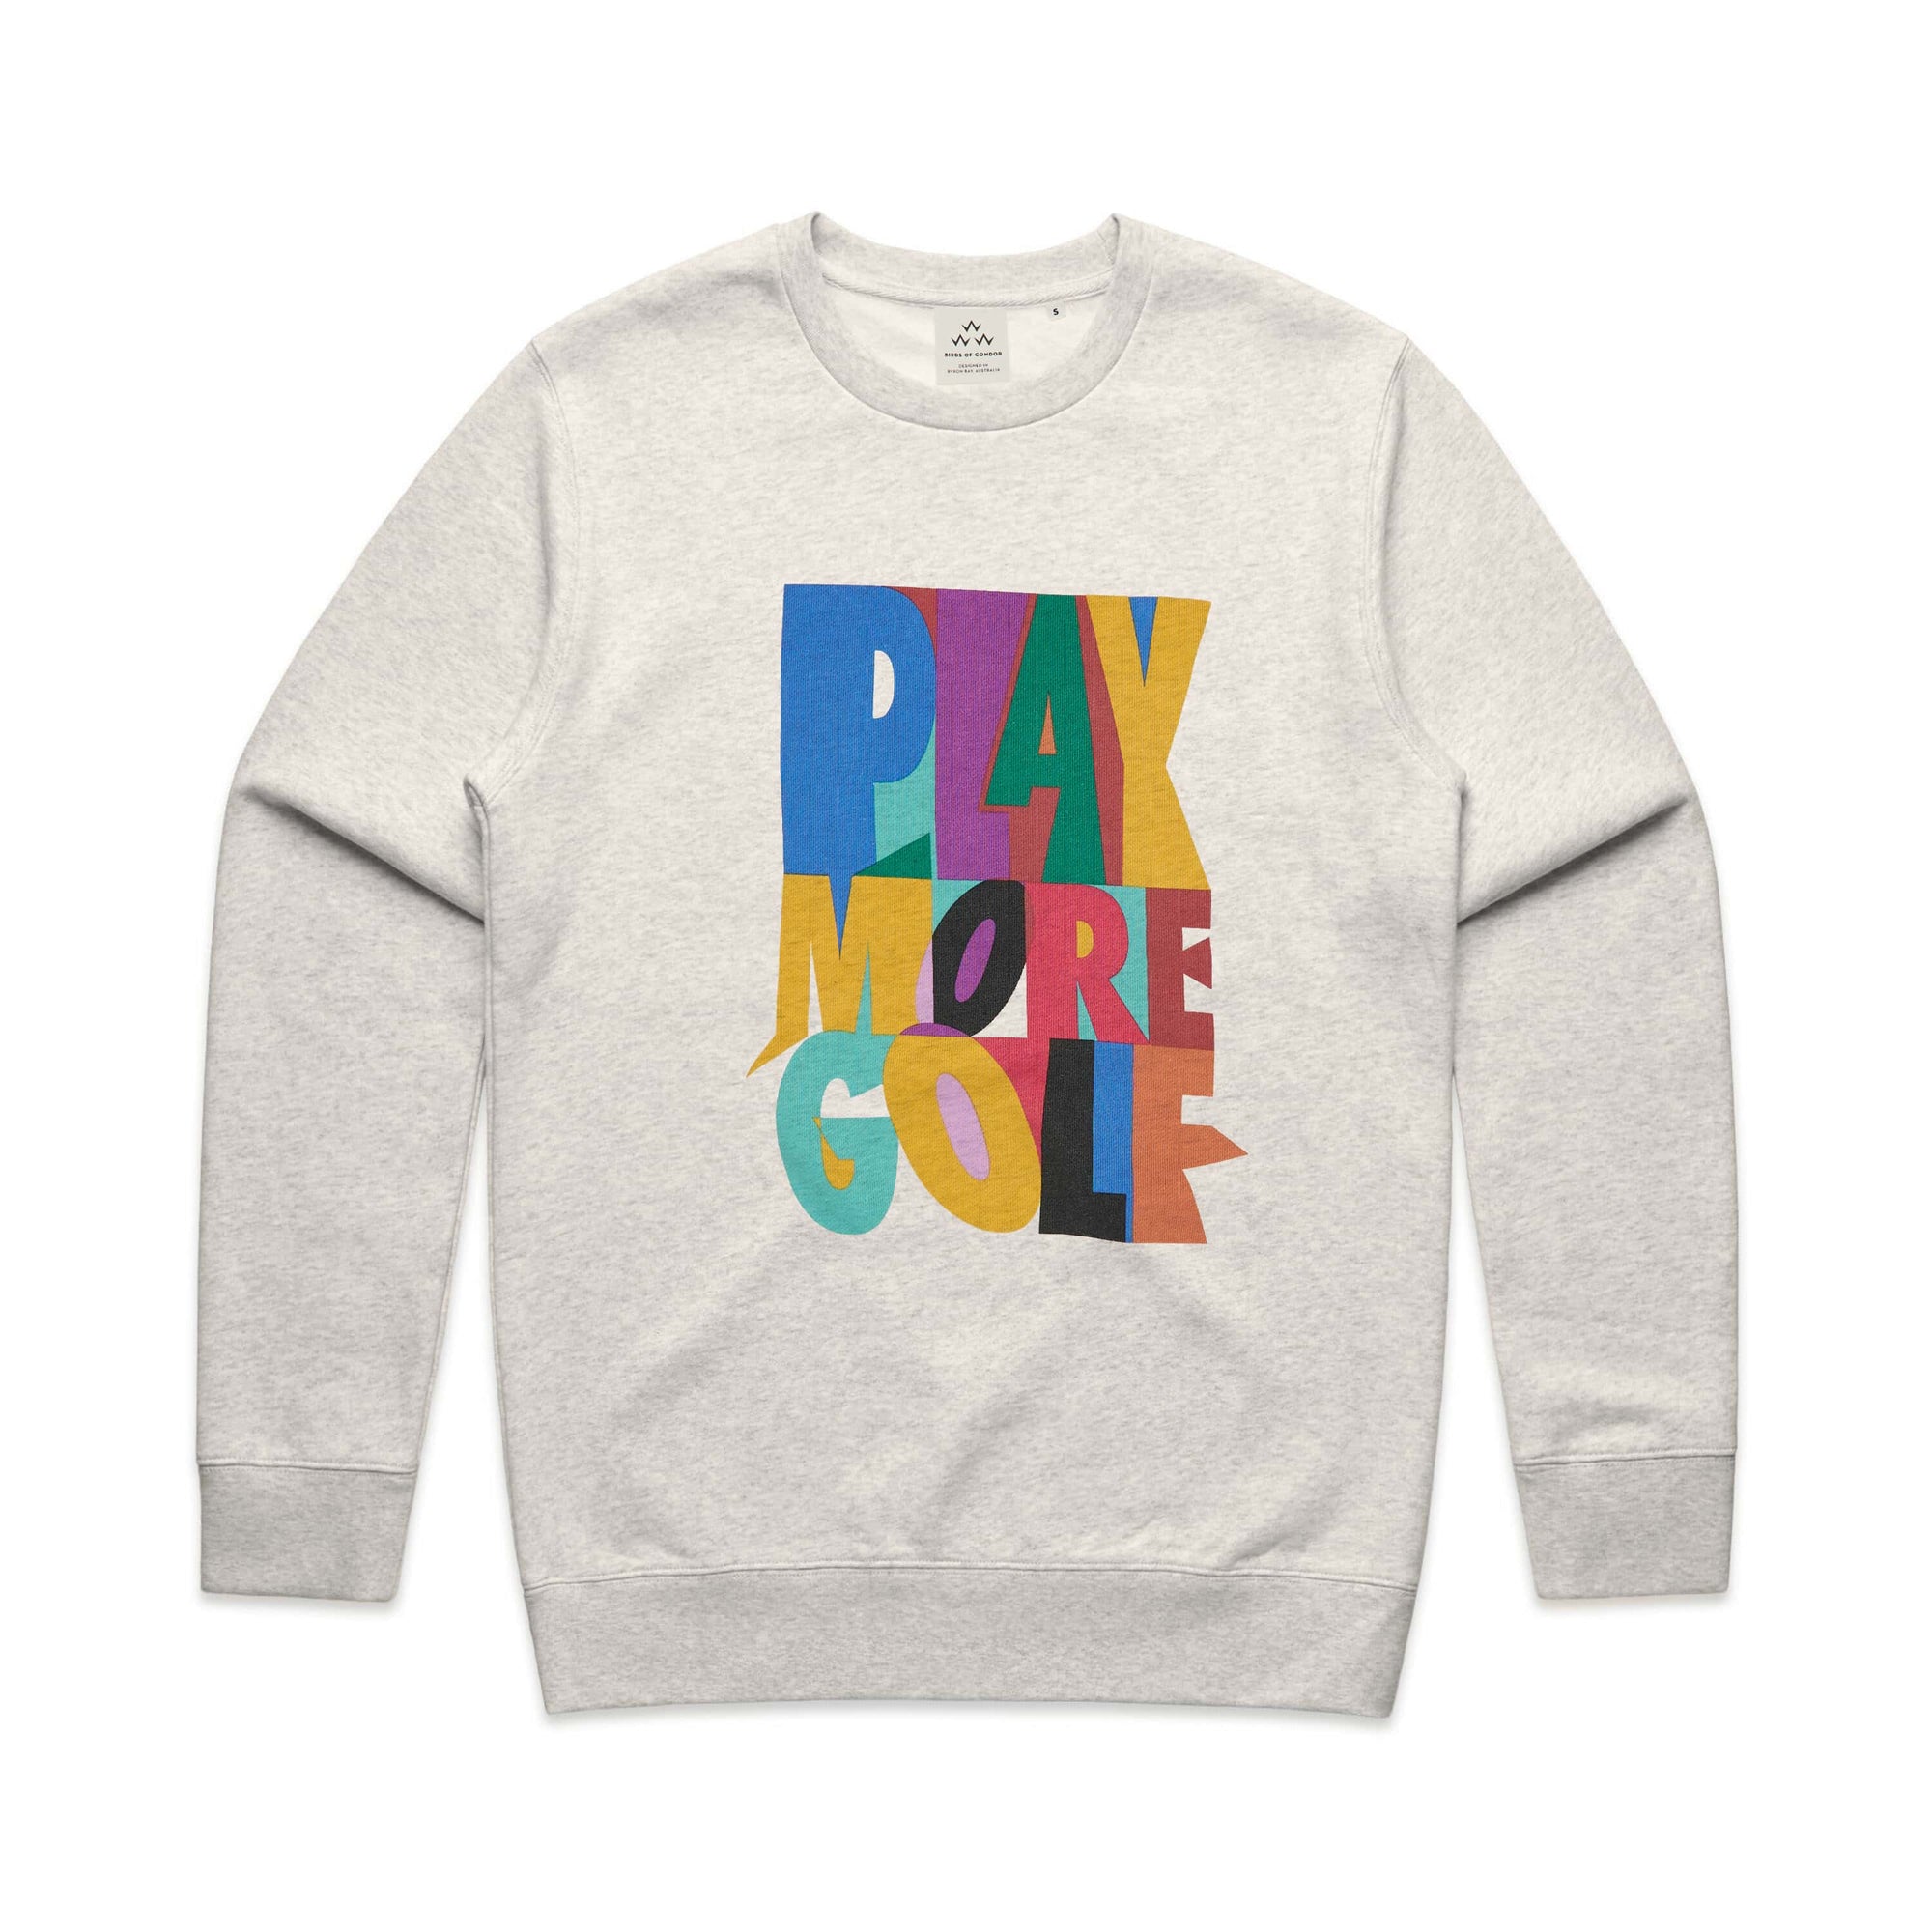 Wanna feel good? We got you, shop and Play More Golf online. White sweater with nineties style graphic.